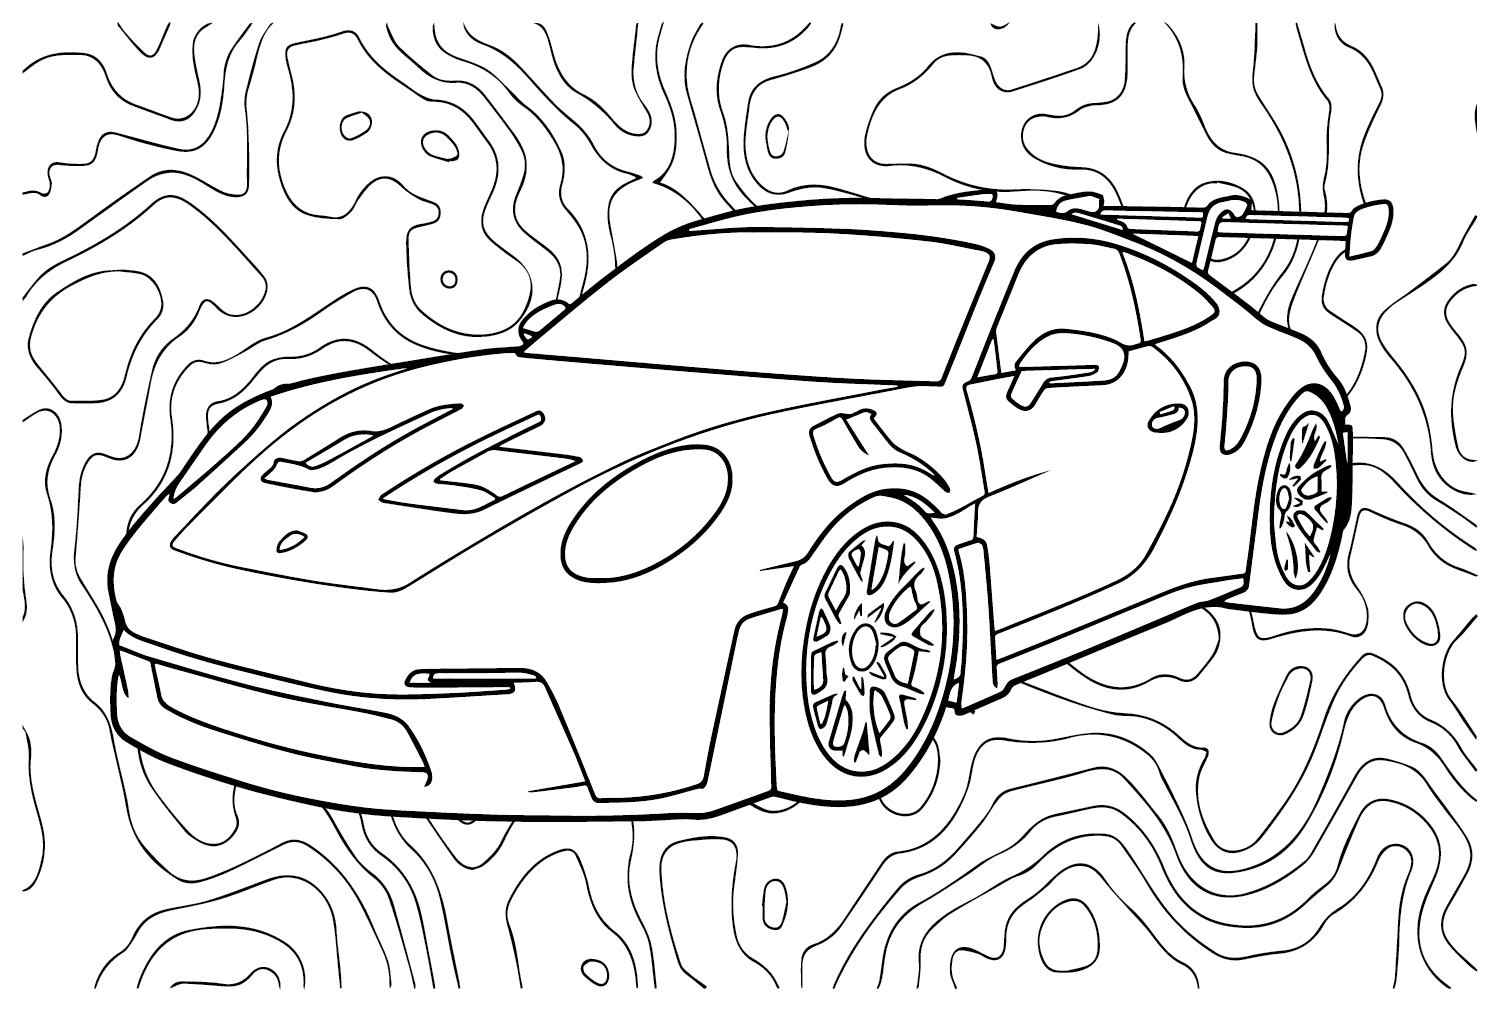 Porsche 911 GT3 RS Coloring Page from Porsche